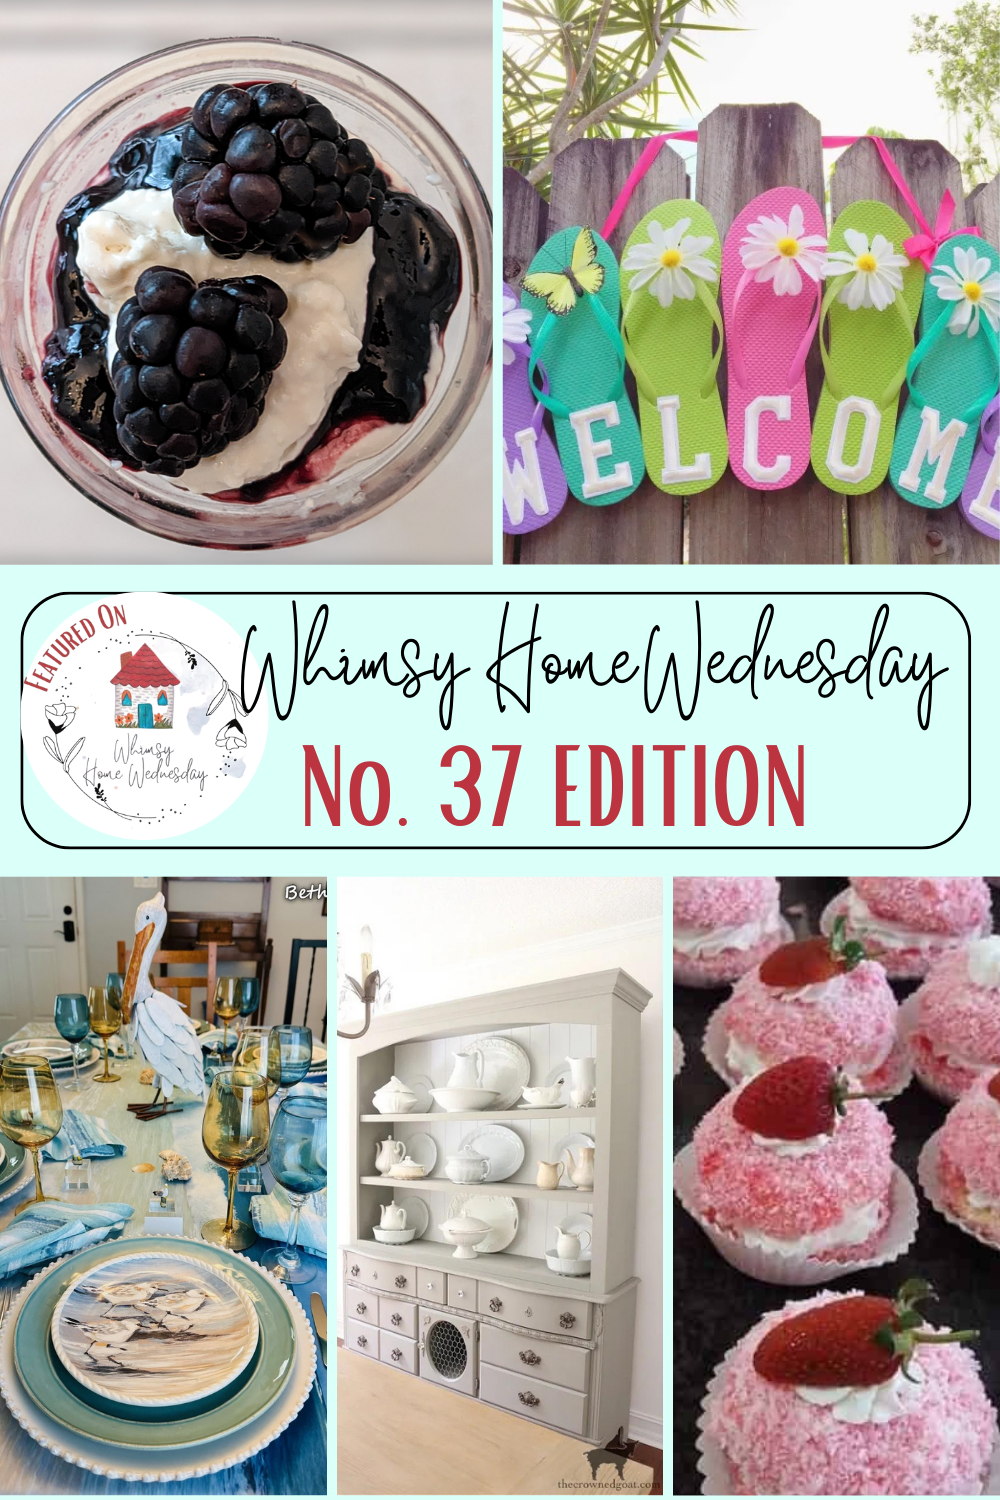 Join us on Whimsy Home Wednesday Blog Link Party No. 37 and see host projects, the features from the previous week and link up your posts!